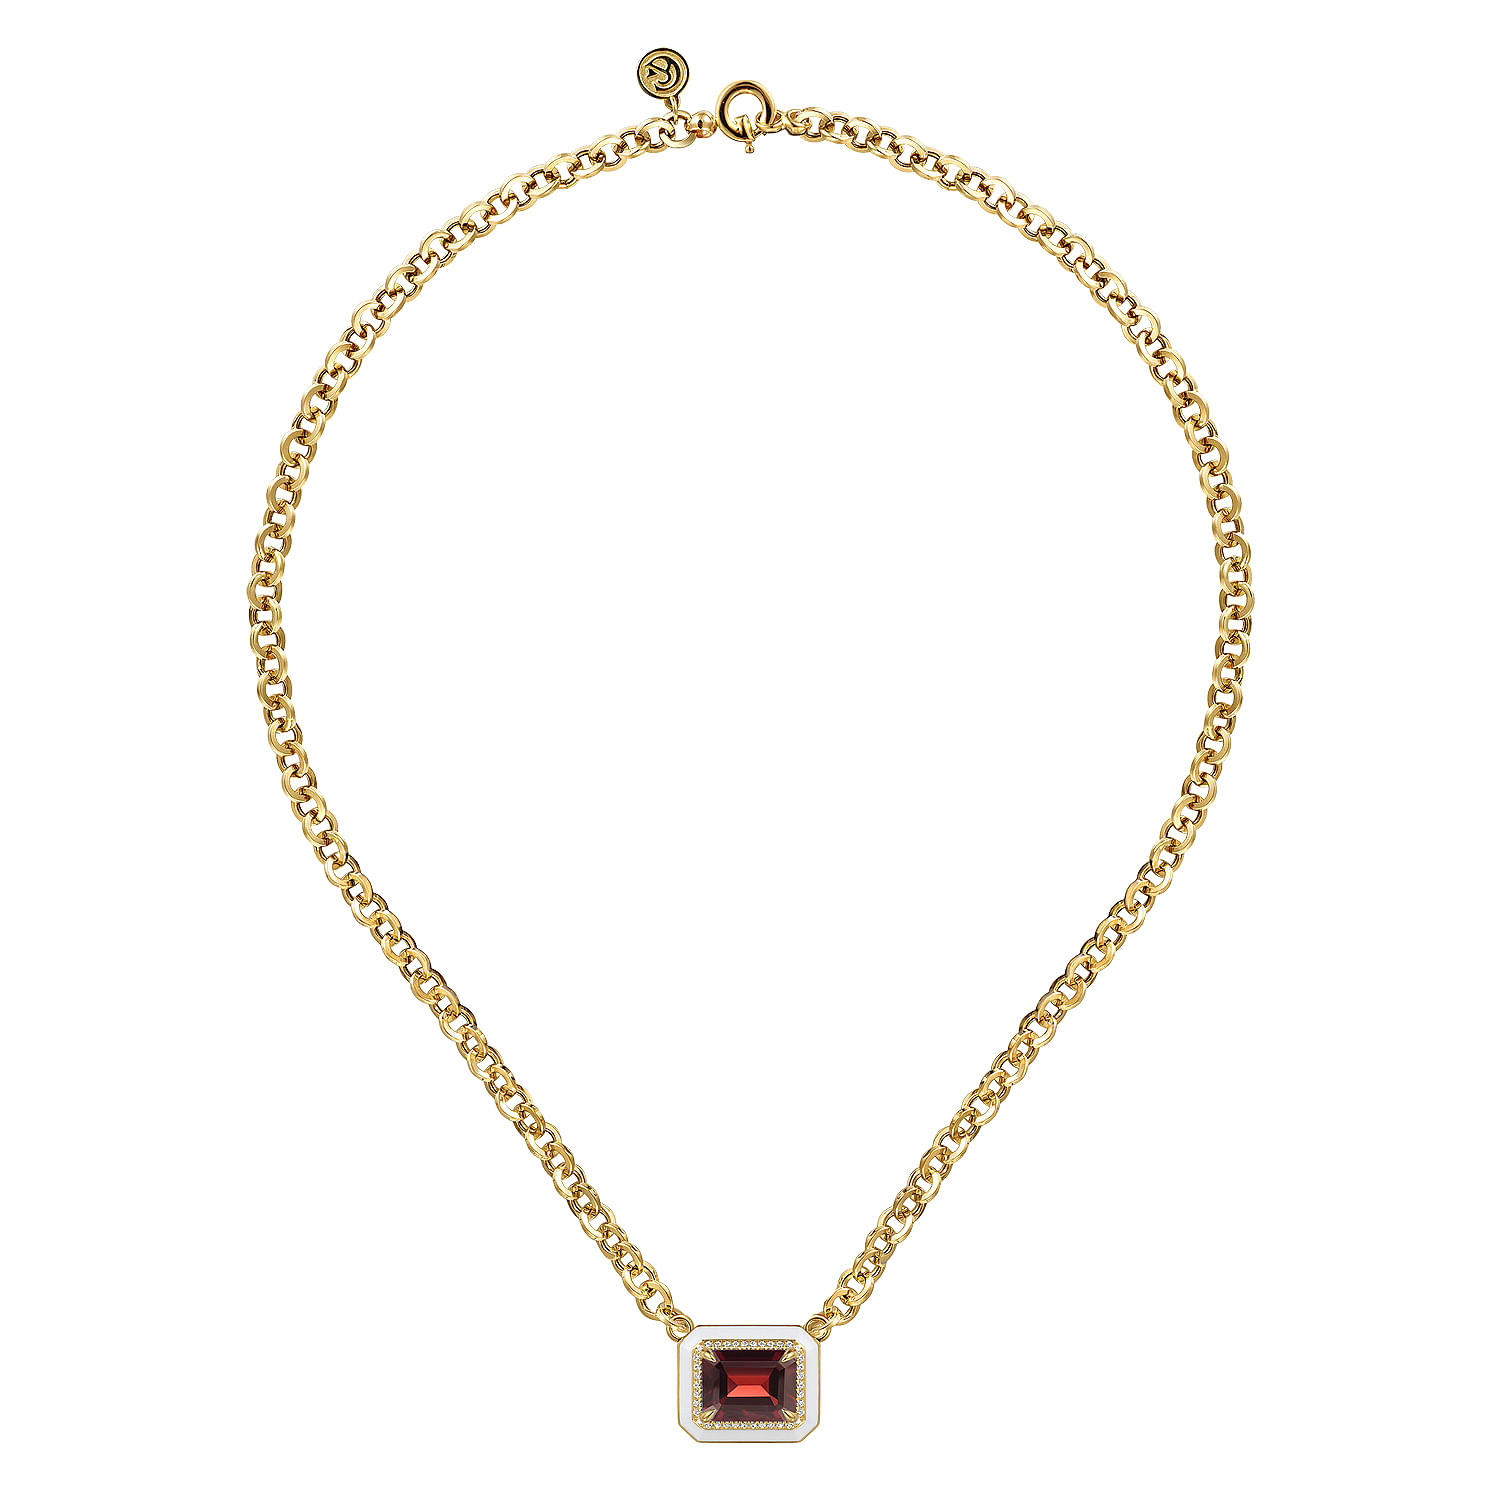 14K Yellow Gold Diamond and Garnet Emerald Cut Necklace With Flower Pattern J-Back and White Enamel